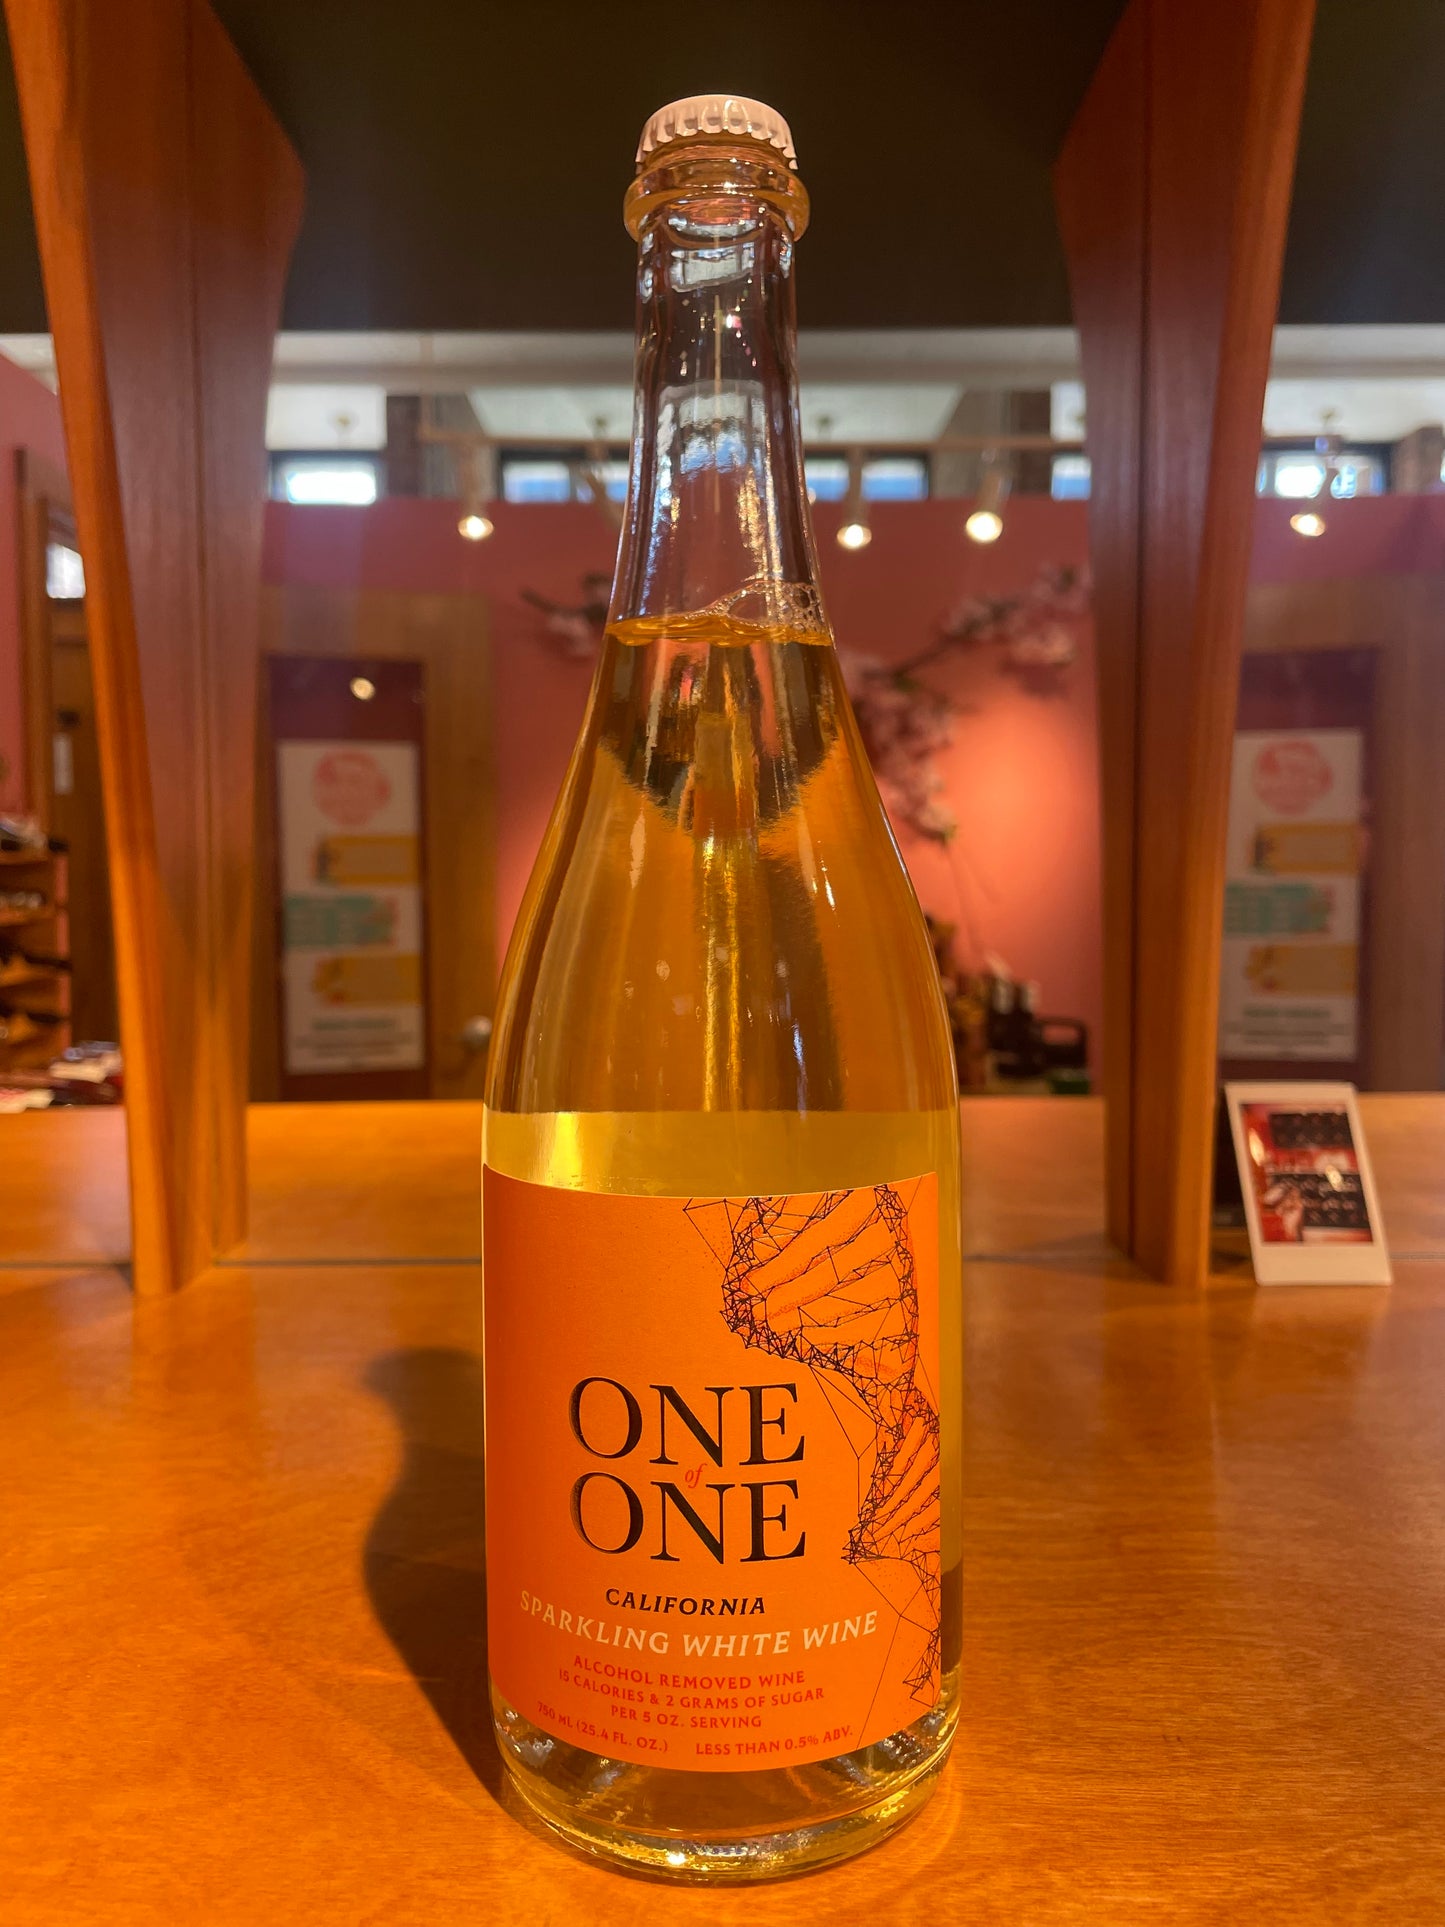 One of One, Non-Alcoholic Sparkling White Wine